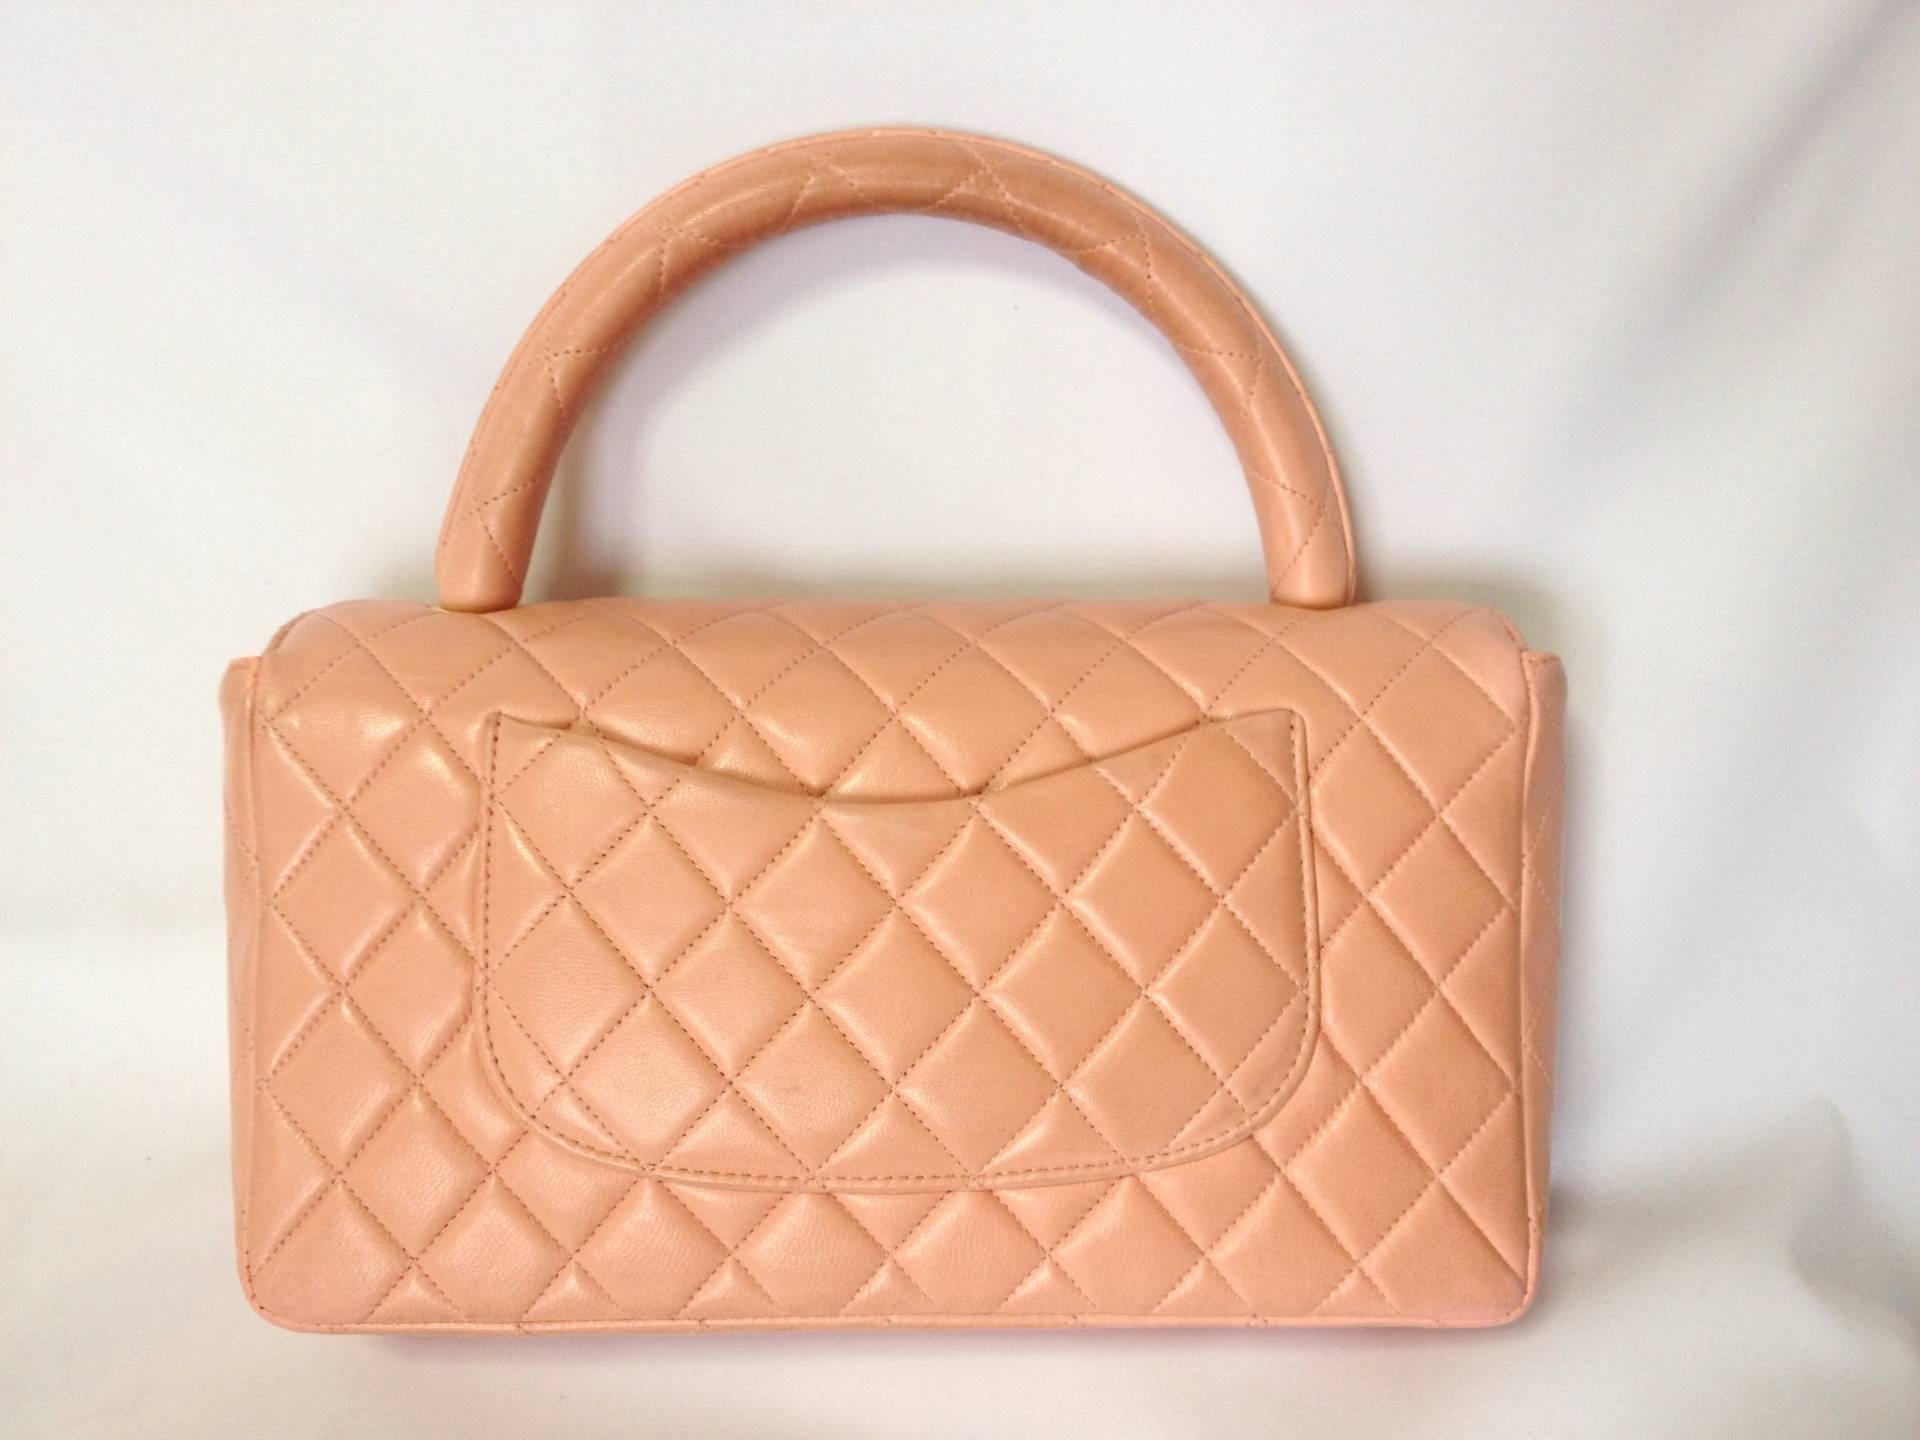 Vintage CHANEL milky pink color lambskin classic 2.55 handbag purse with gold CC In Good Condition For Sale In Kashiwa, Chiba